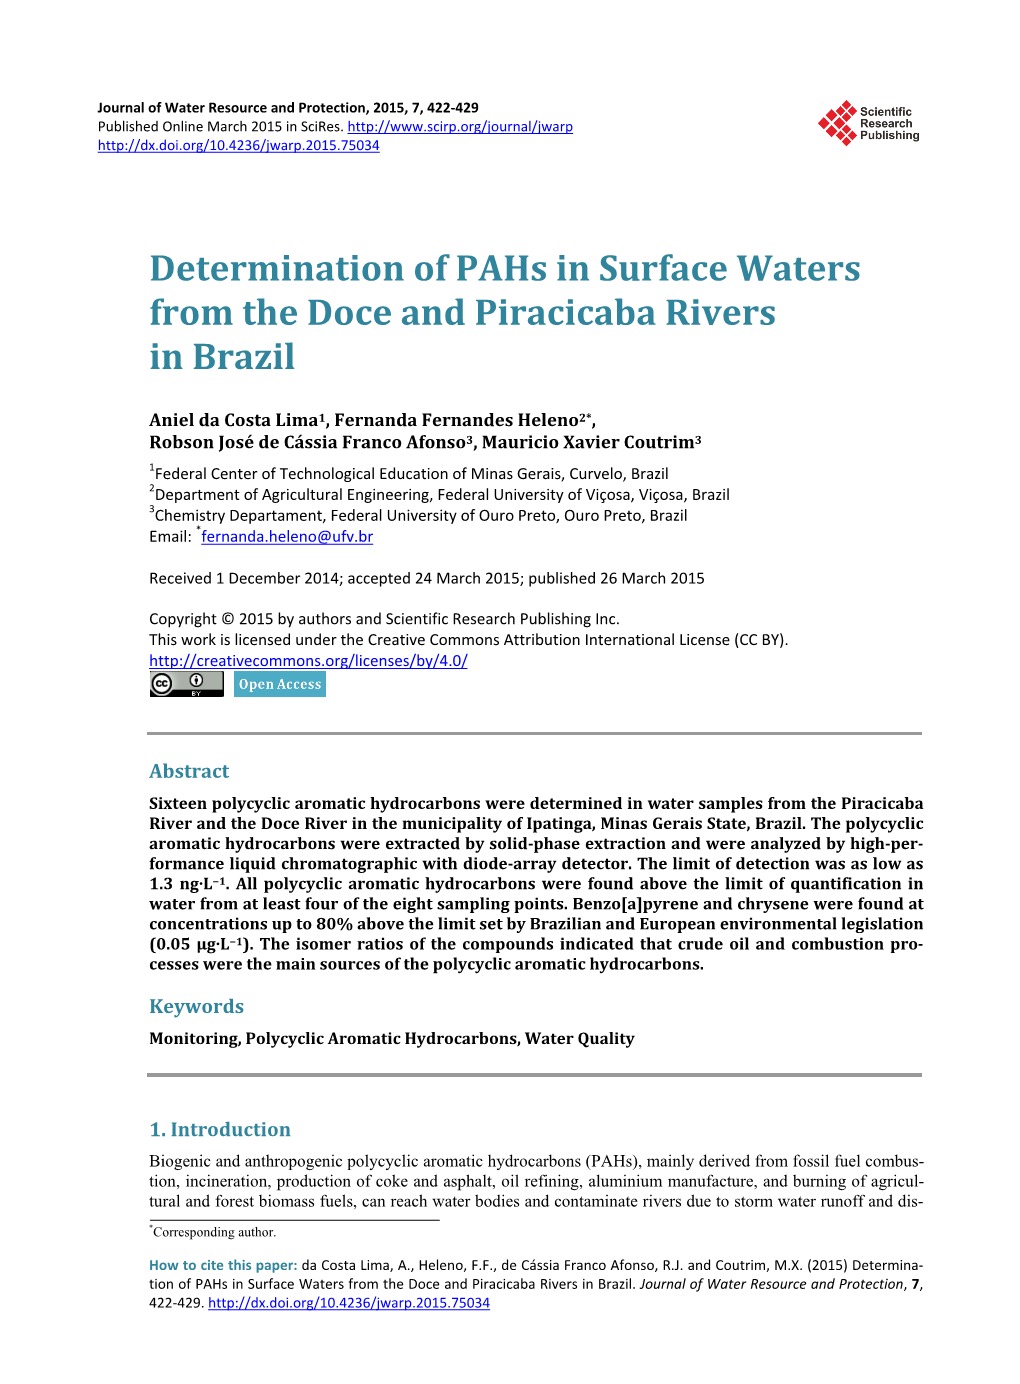 Determination of Pahs in Surface Waters from the Doce and Piracicaba Rivers in Brazil